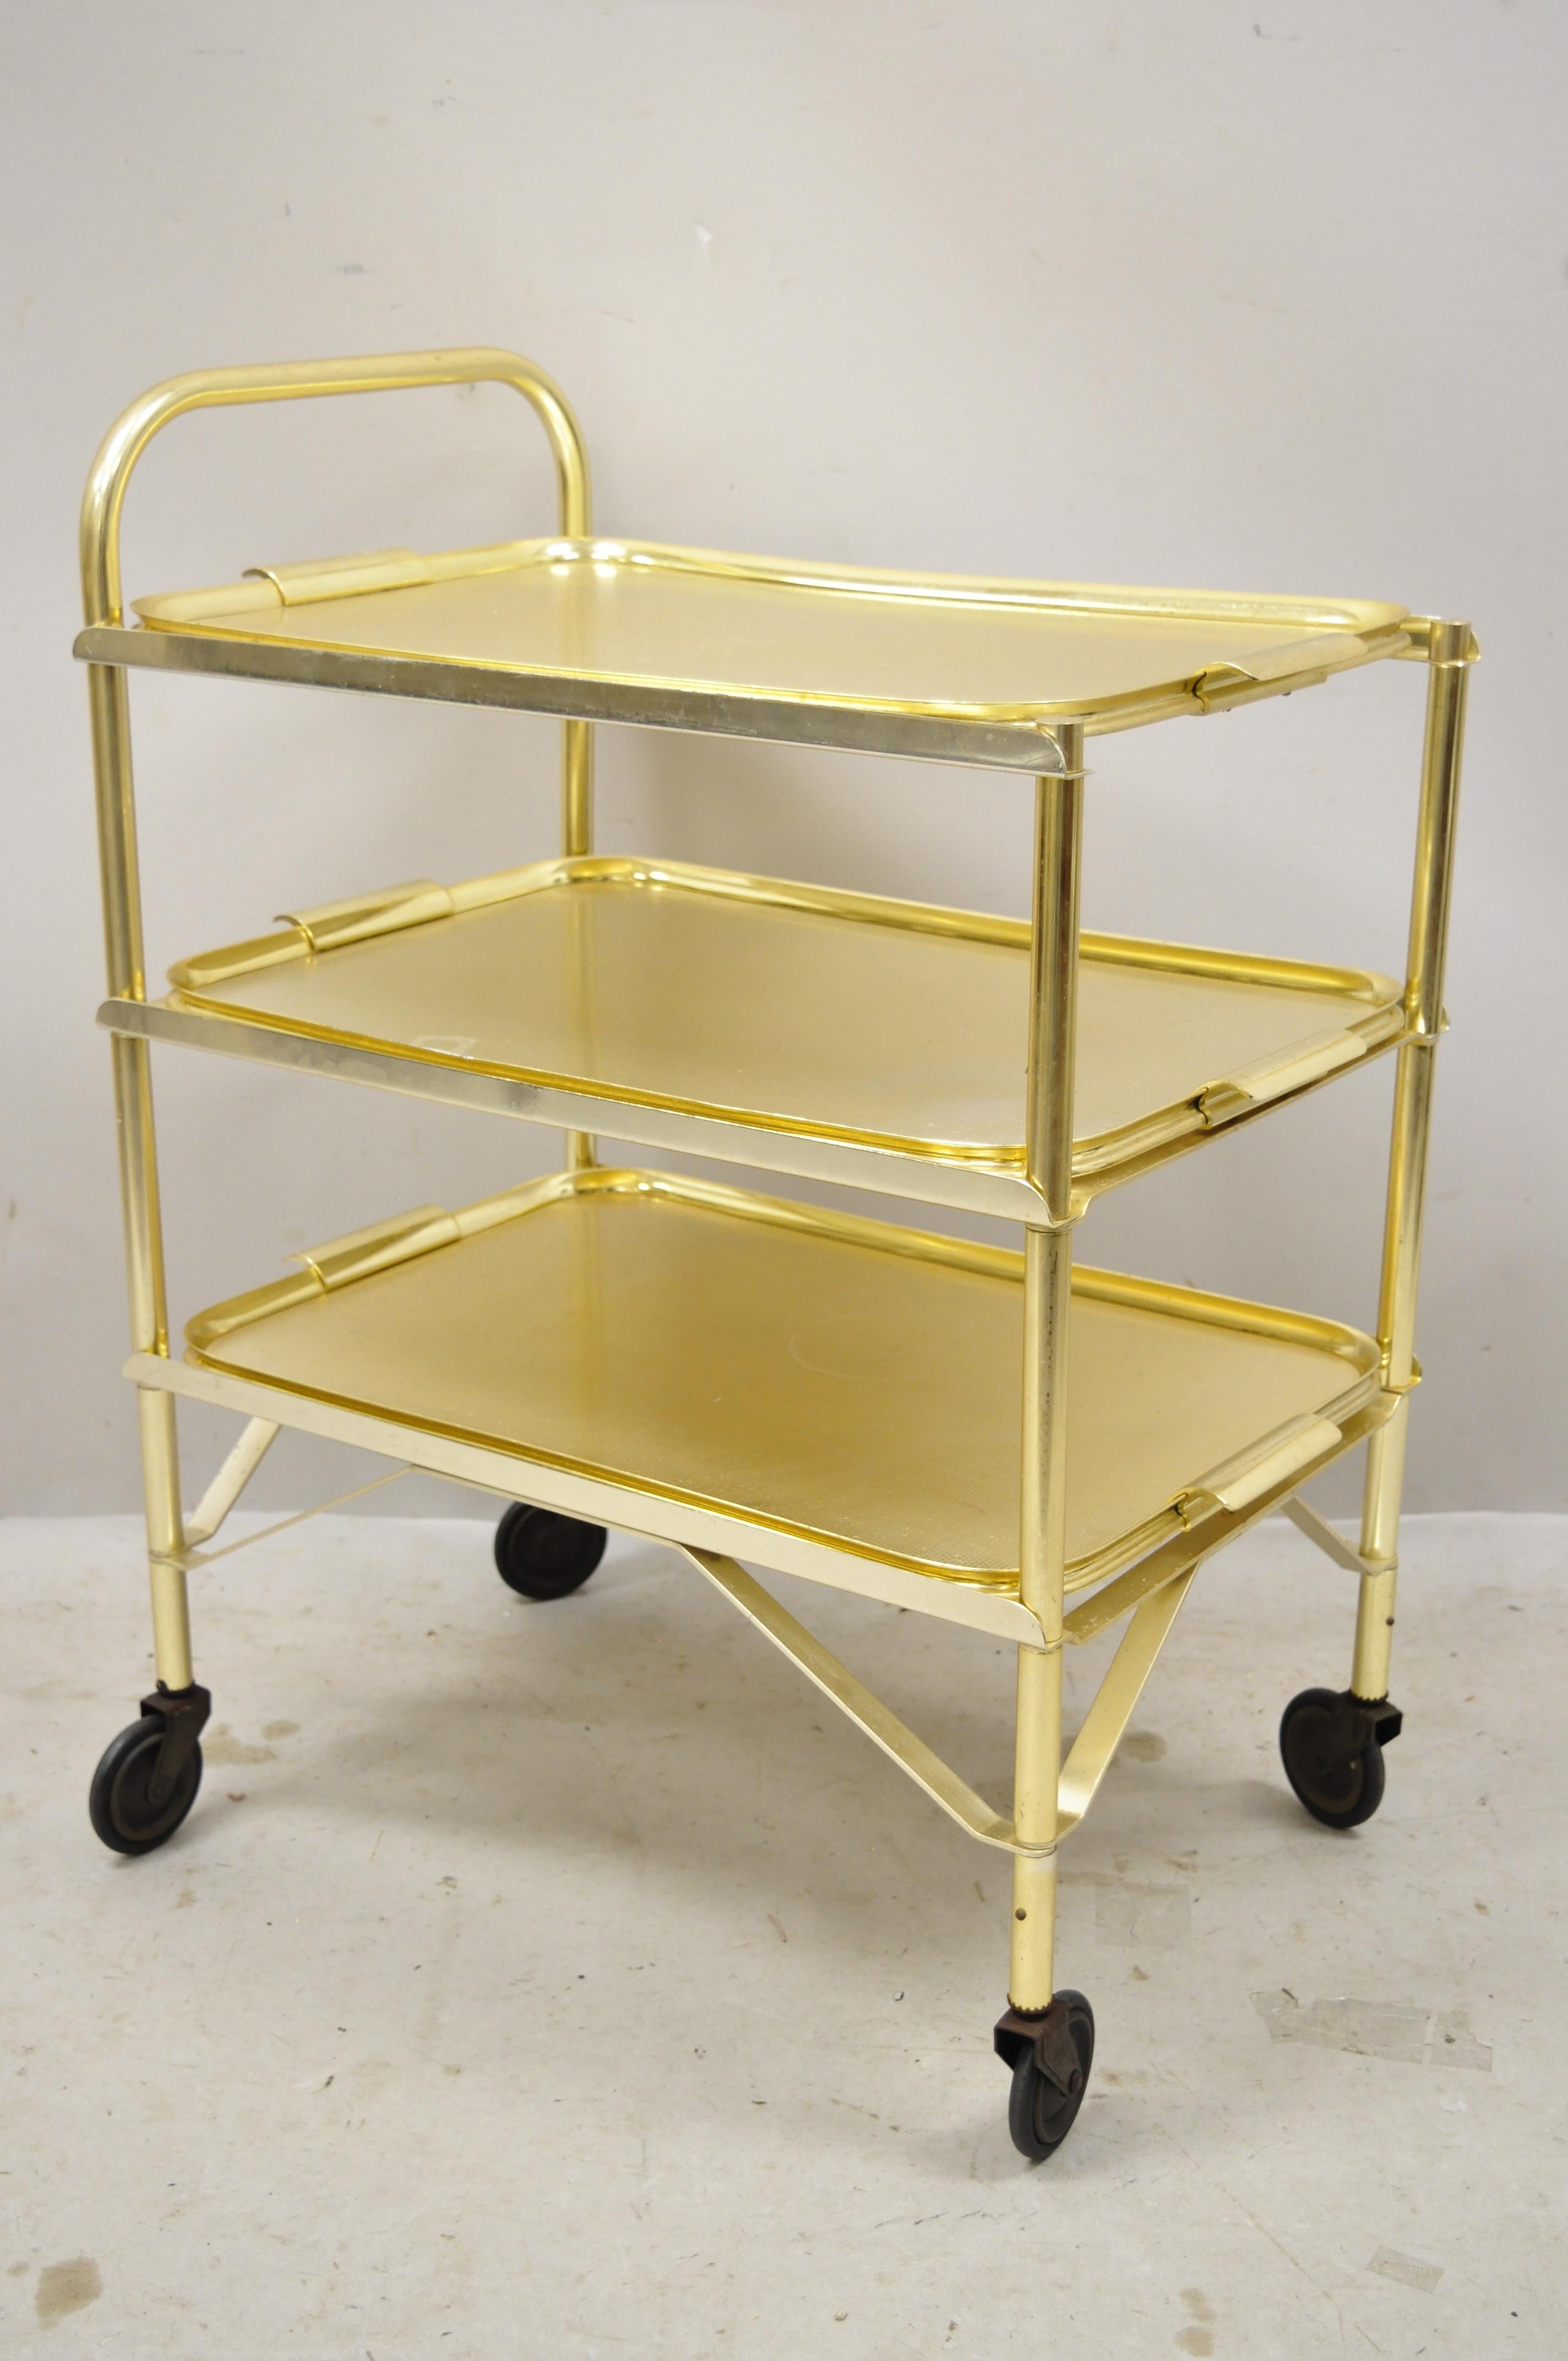 Midcentury gold aluminum metal folding rolling bar cart server with 3 trays. Item features 3 removable trays, rolling casters, cast aluminum construction, clean modernist lines, great style and form, circa mid-20th century.
Measurements: 29.5